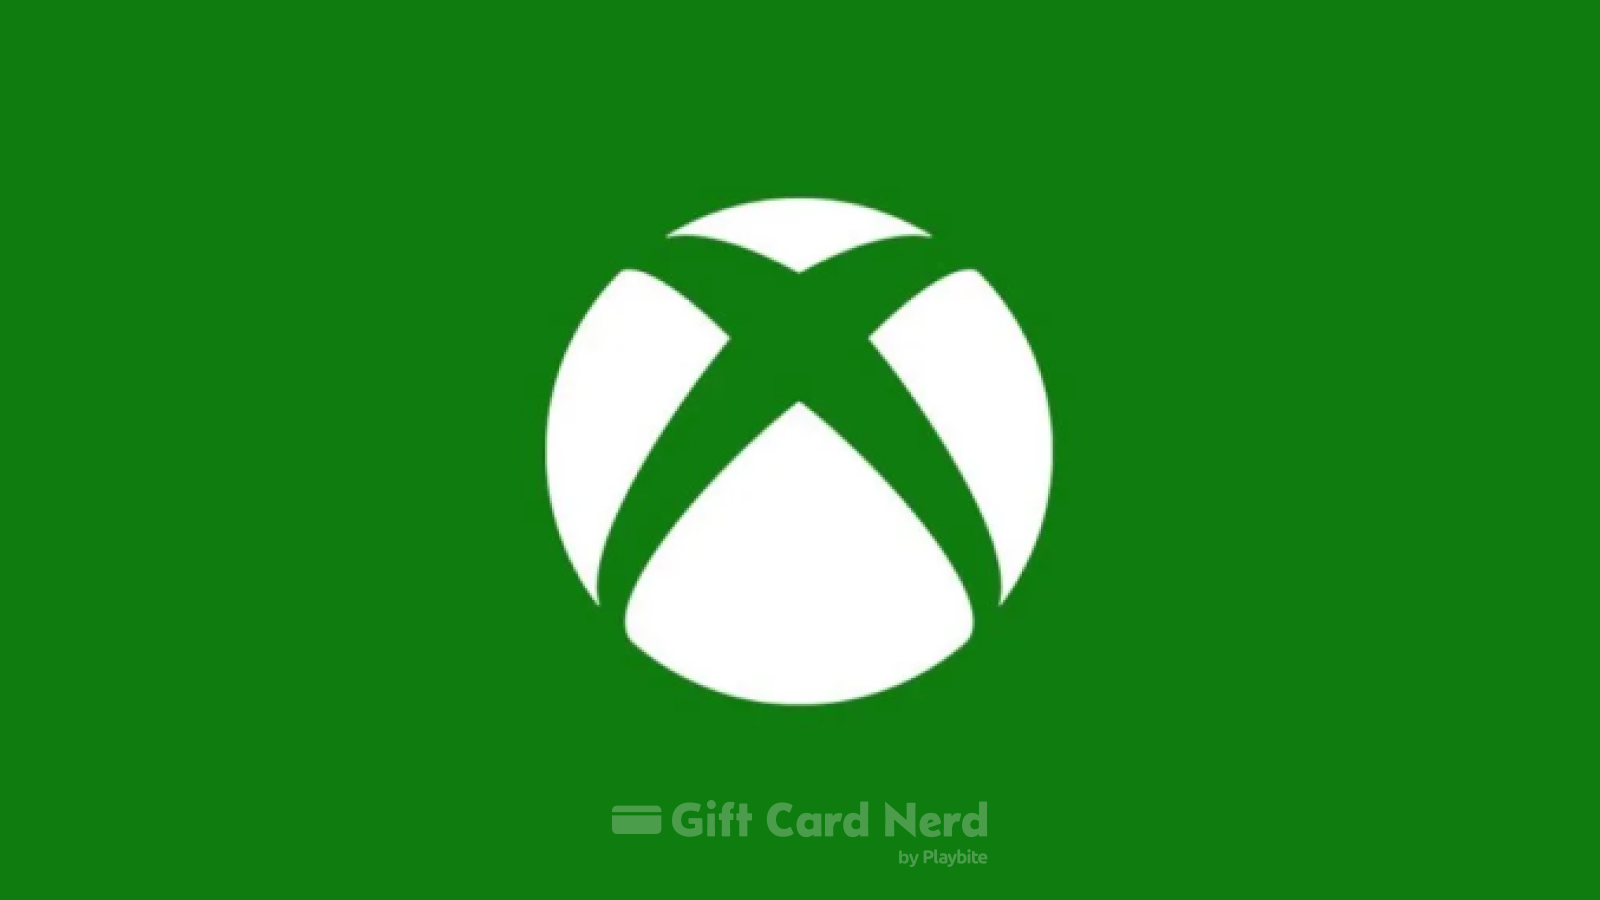 Can I Use an Xbox Gift Card on Amazon?